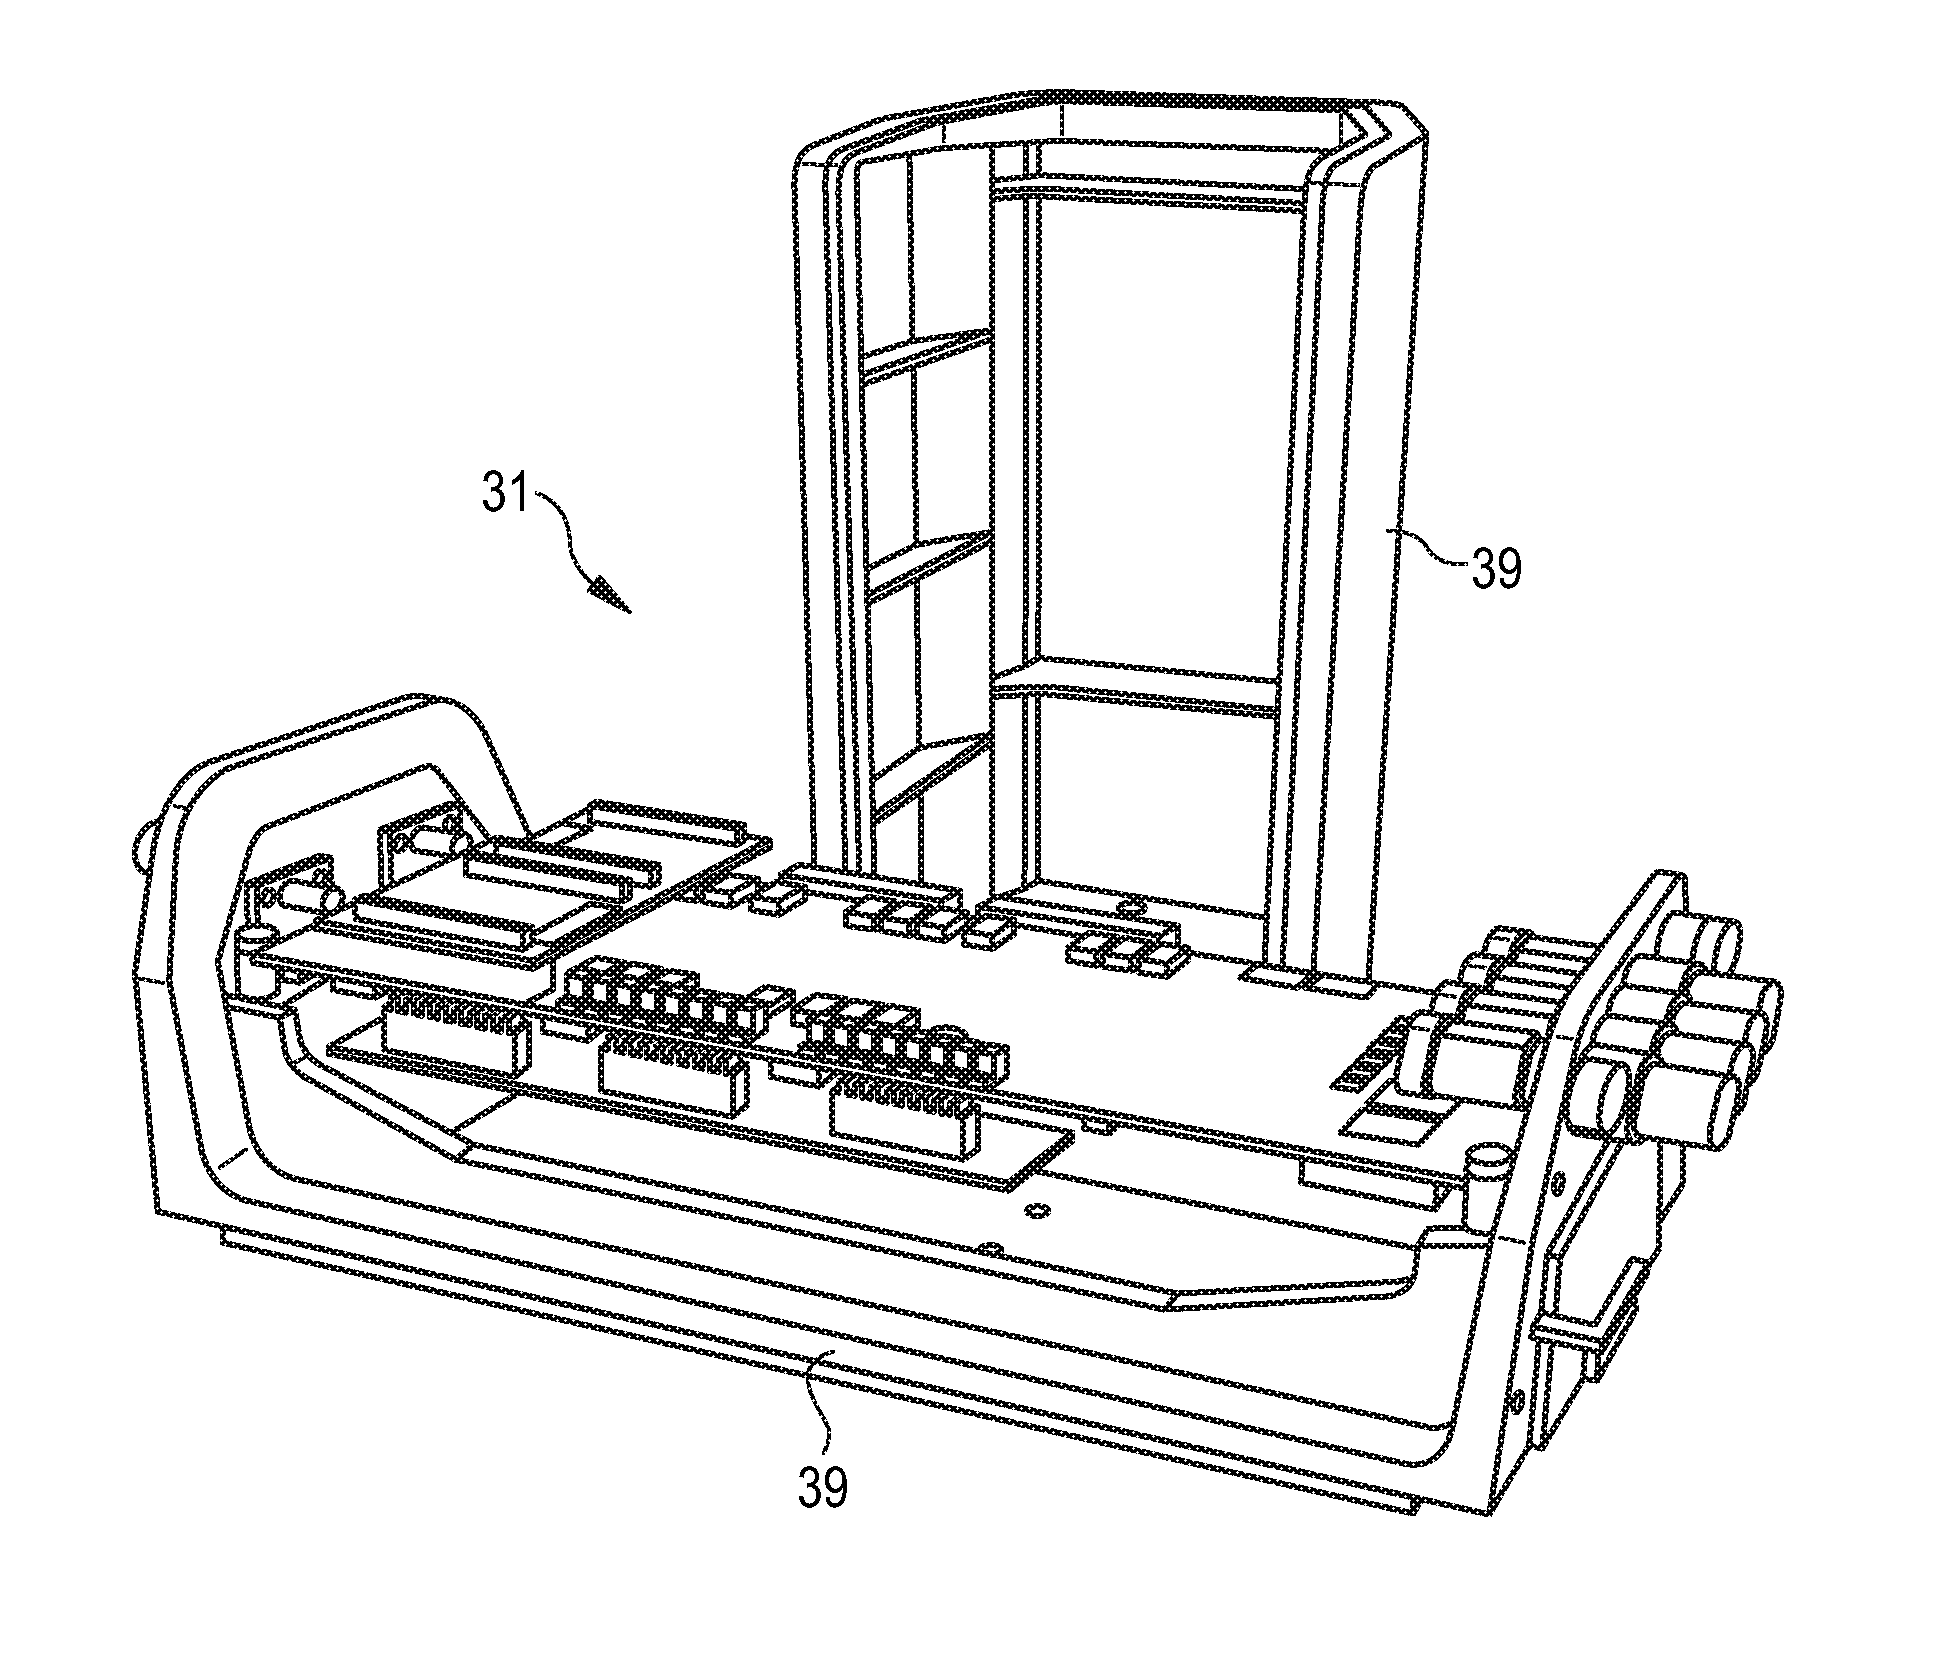 Data detection device for use in combination with an MRI apparatus